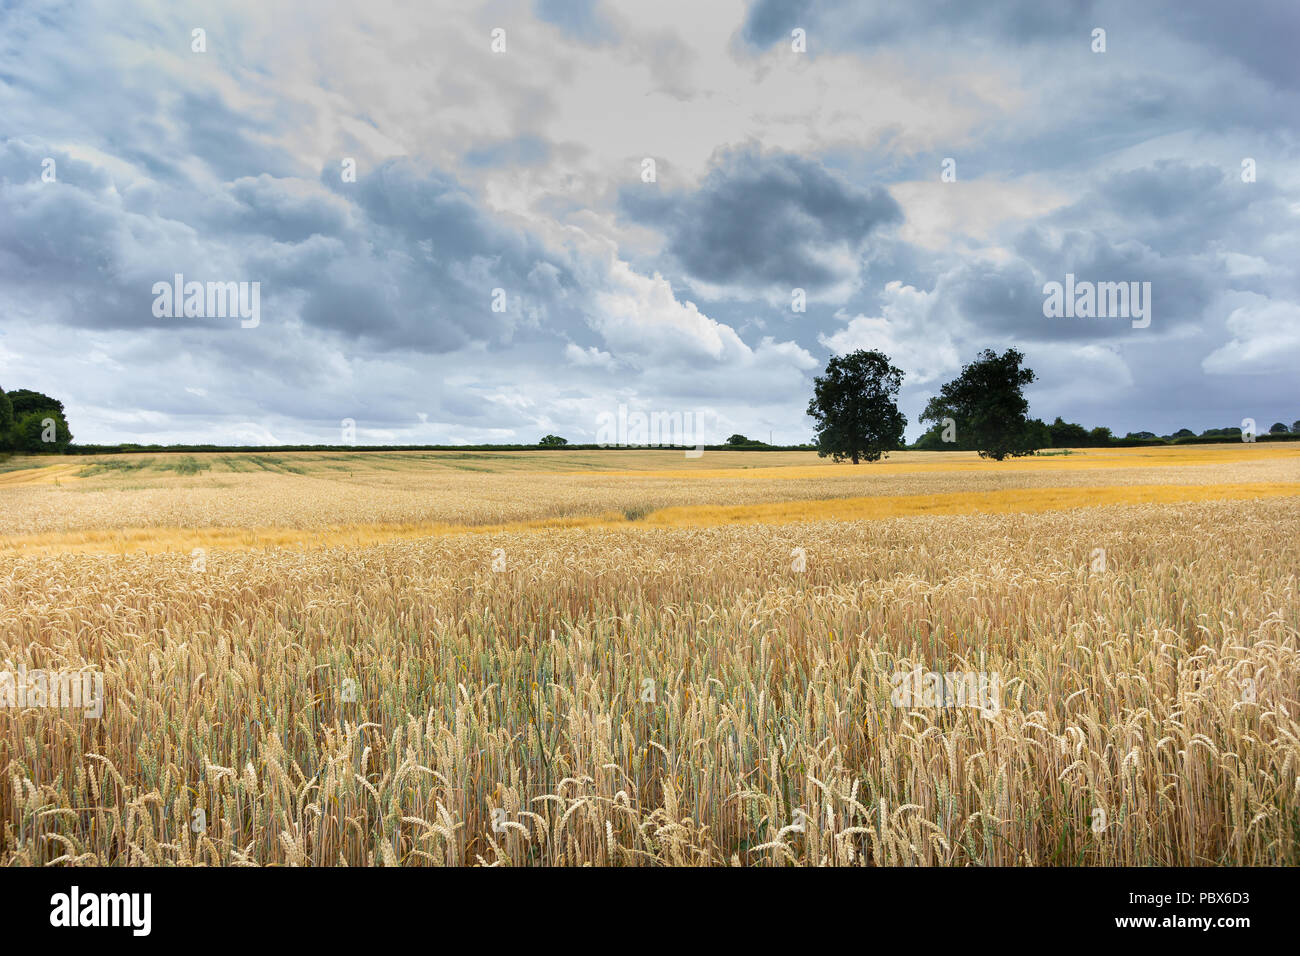 Wheat fields of rural England, before the storms. Stock Photo